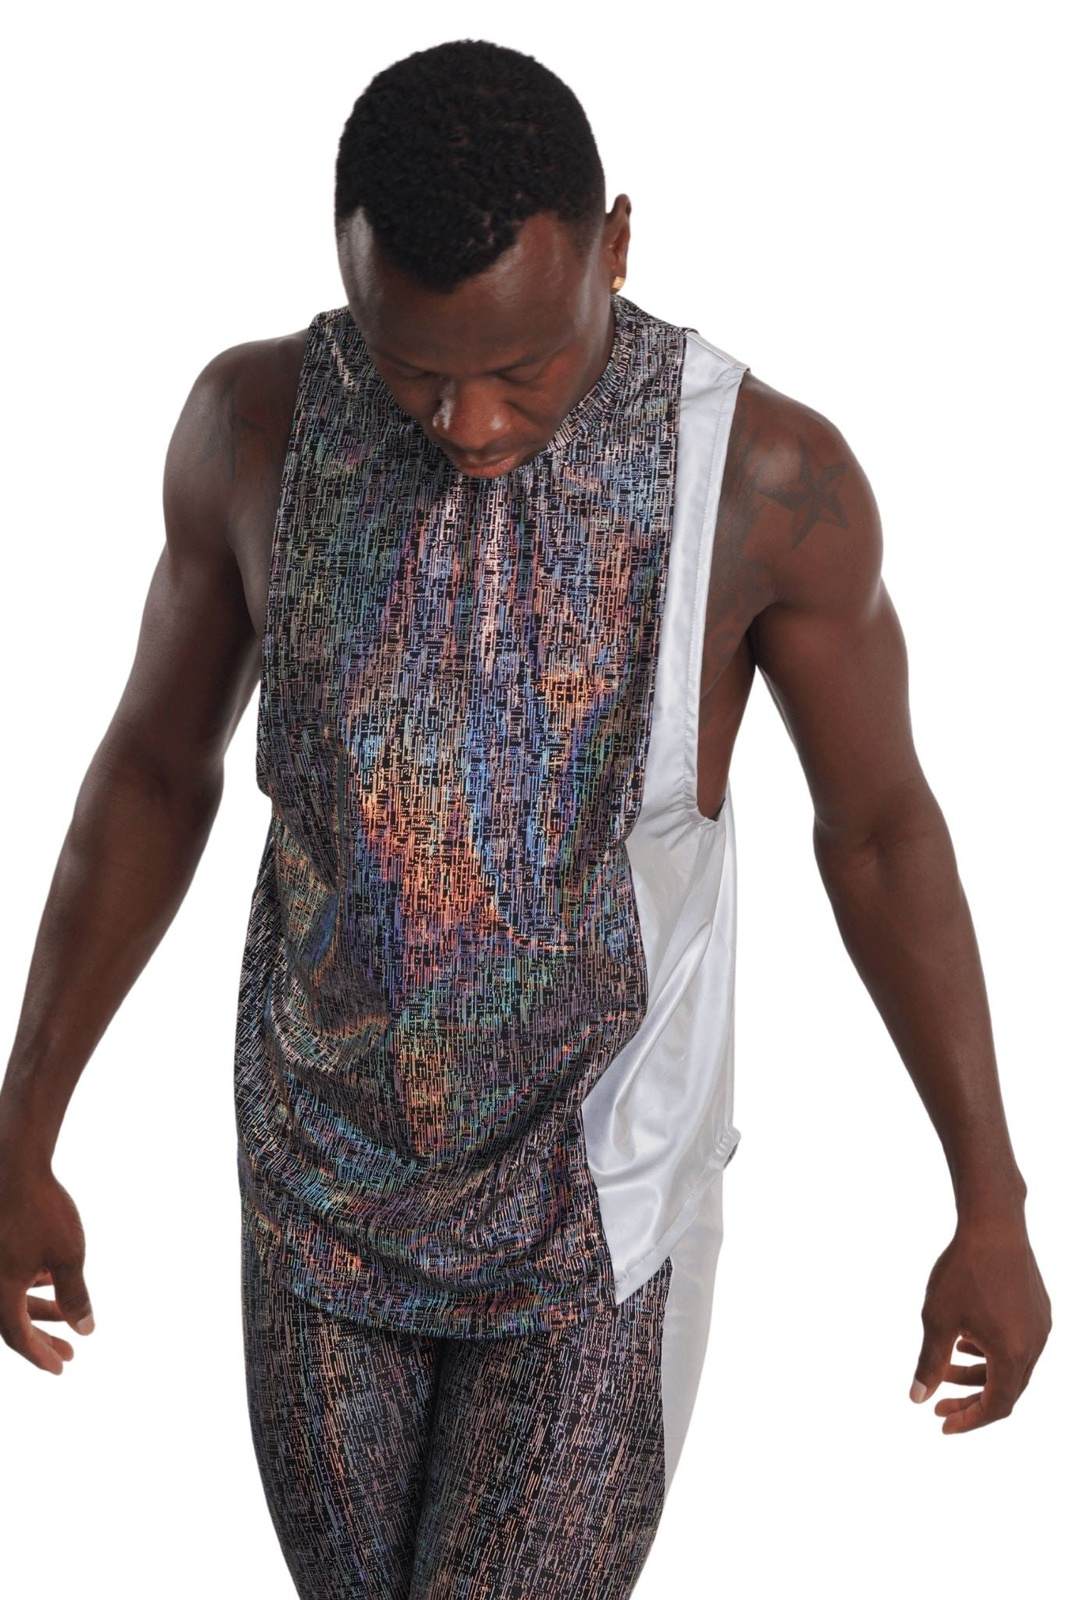 The Hot Shot mens rave top in holographic silver matrix fabric from Love Khaos